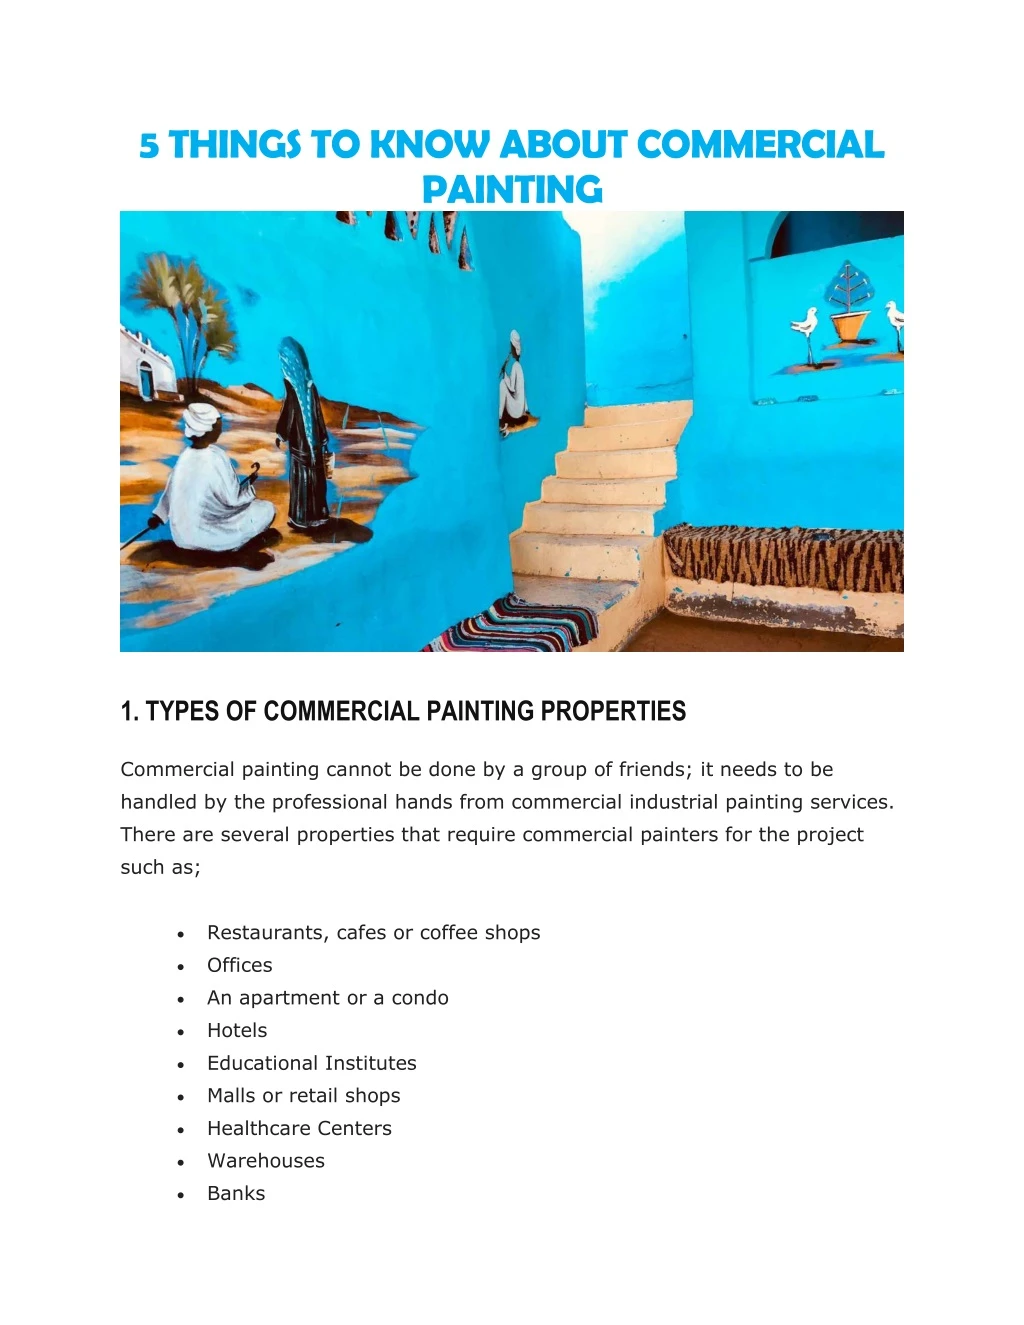 5 things to know about commercial painting